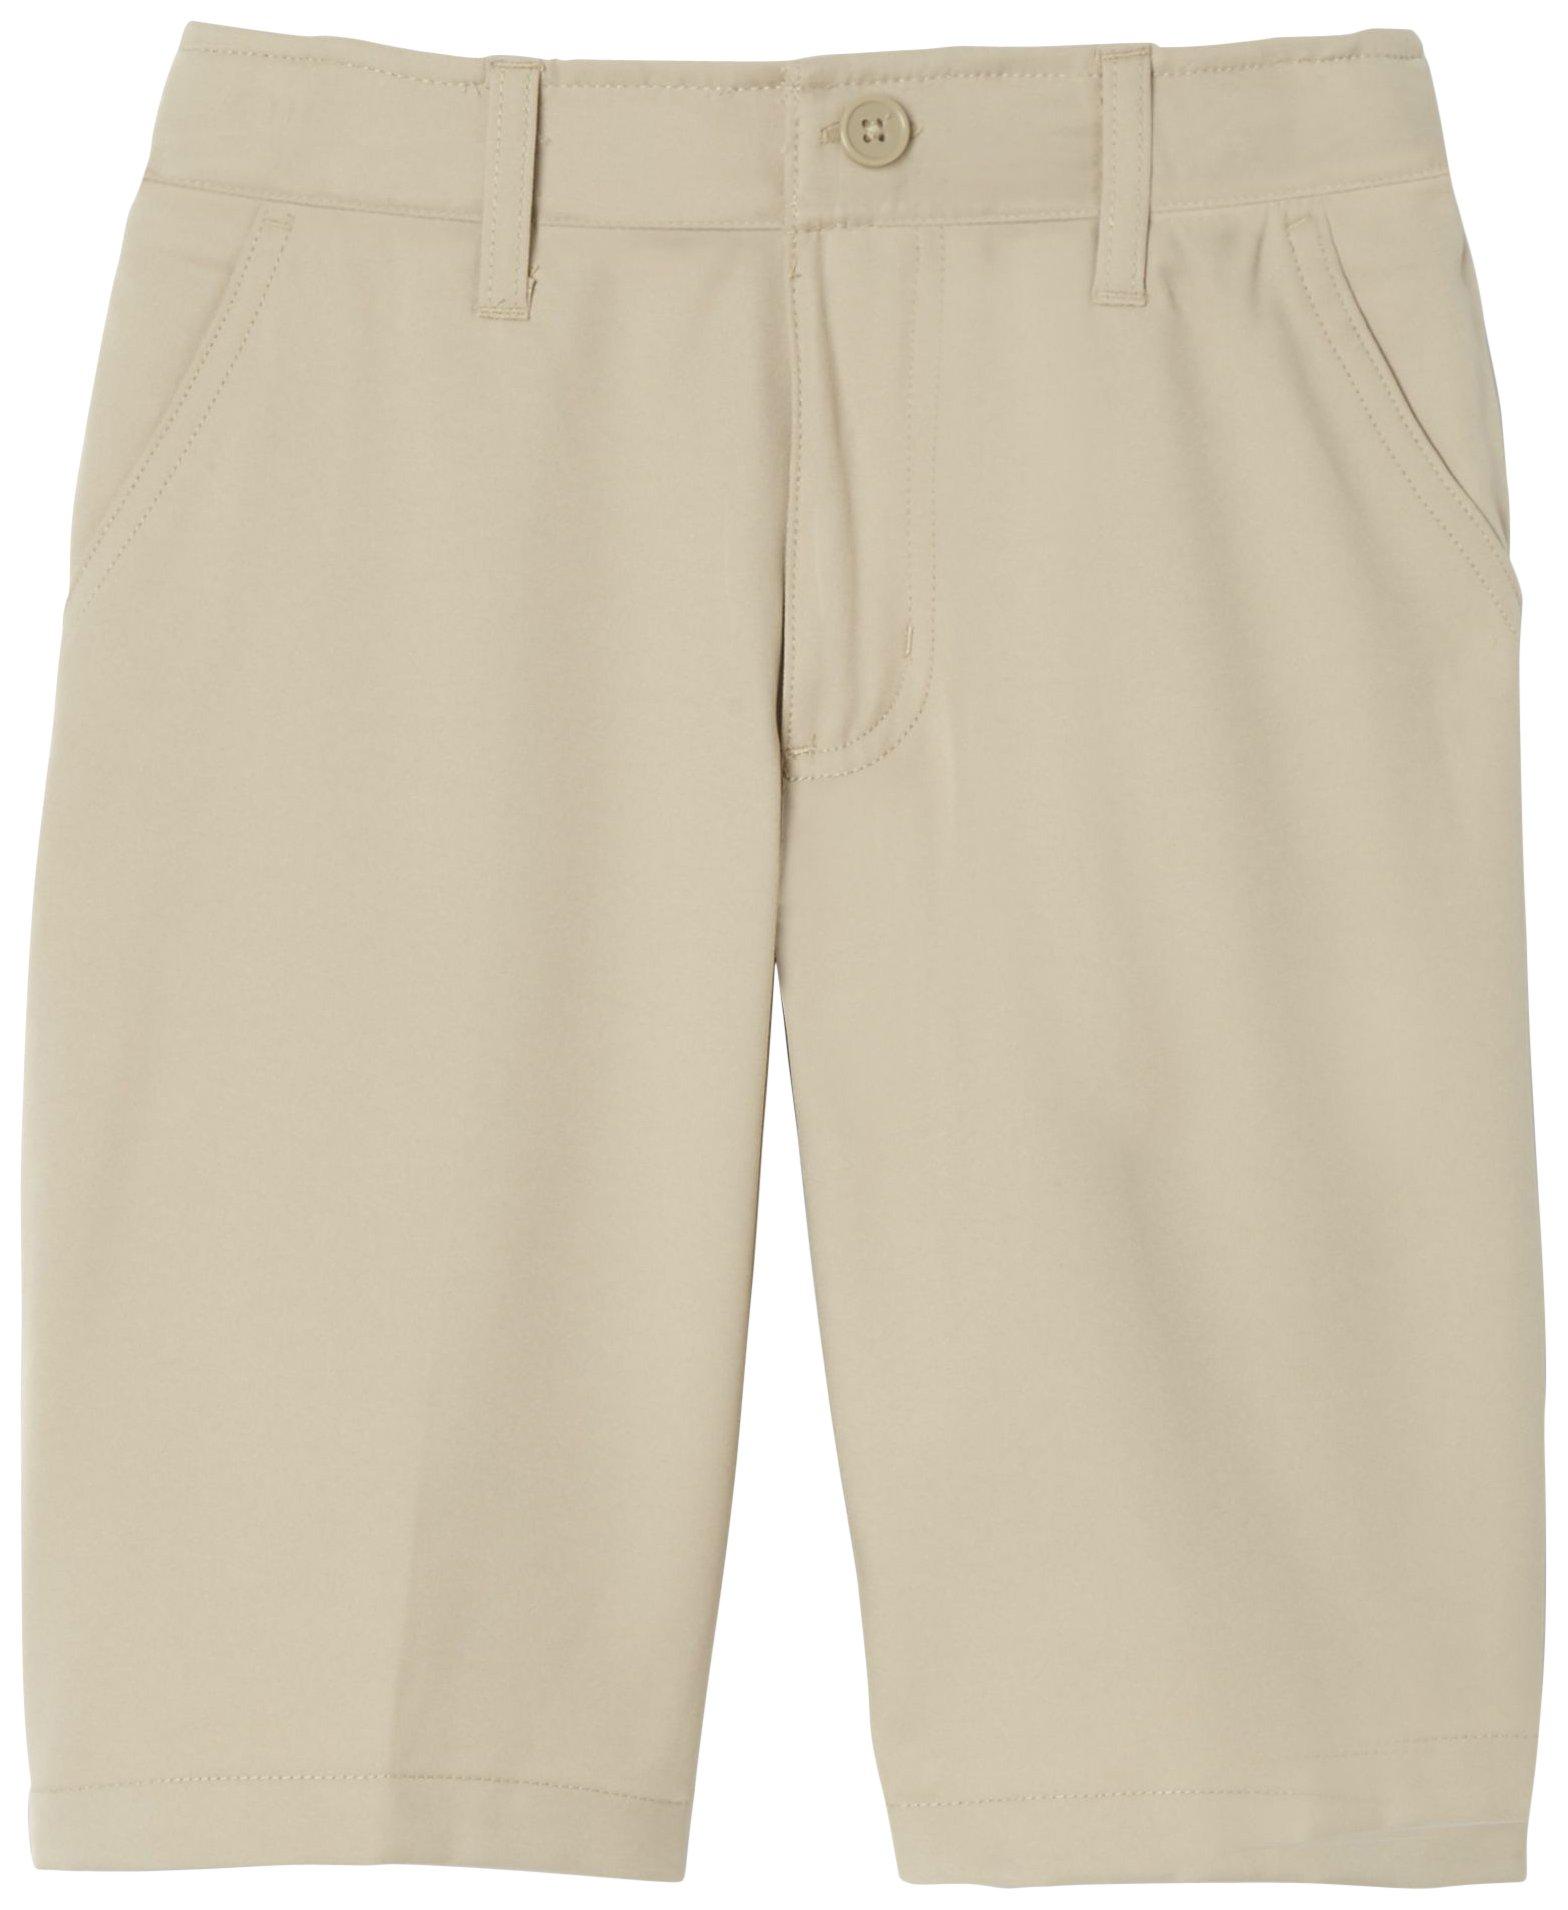 Big Boys Solid Flat Front Stretch Performance Shorts